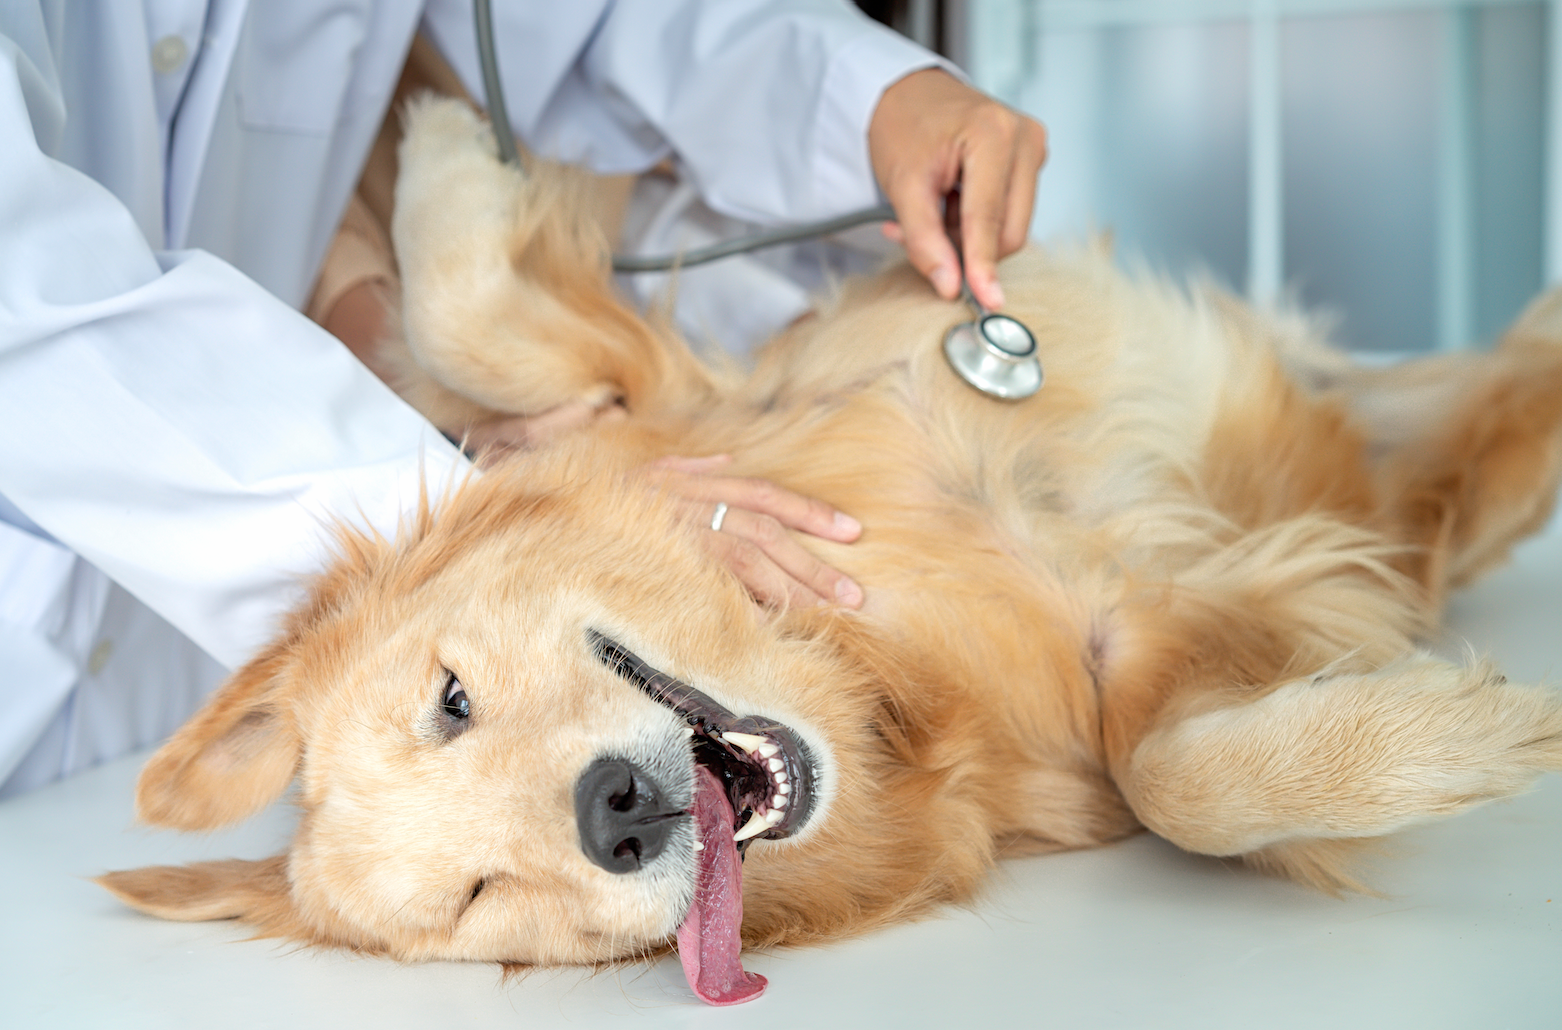 A dog on a table with a stethoscope.